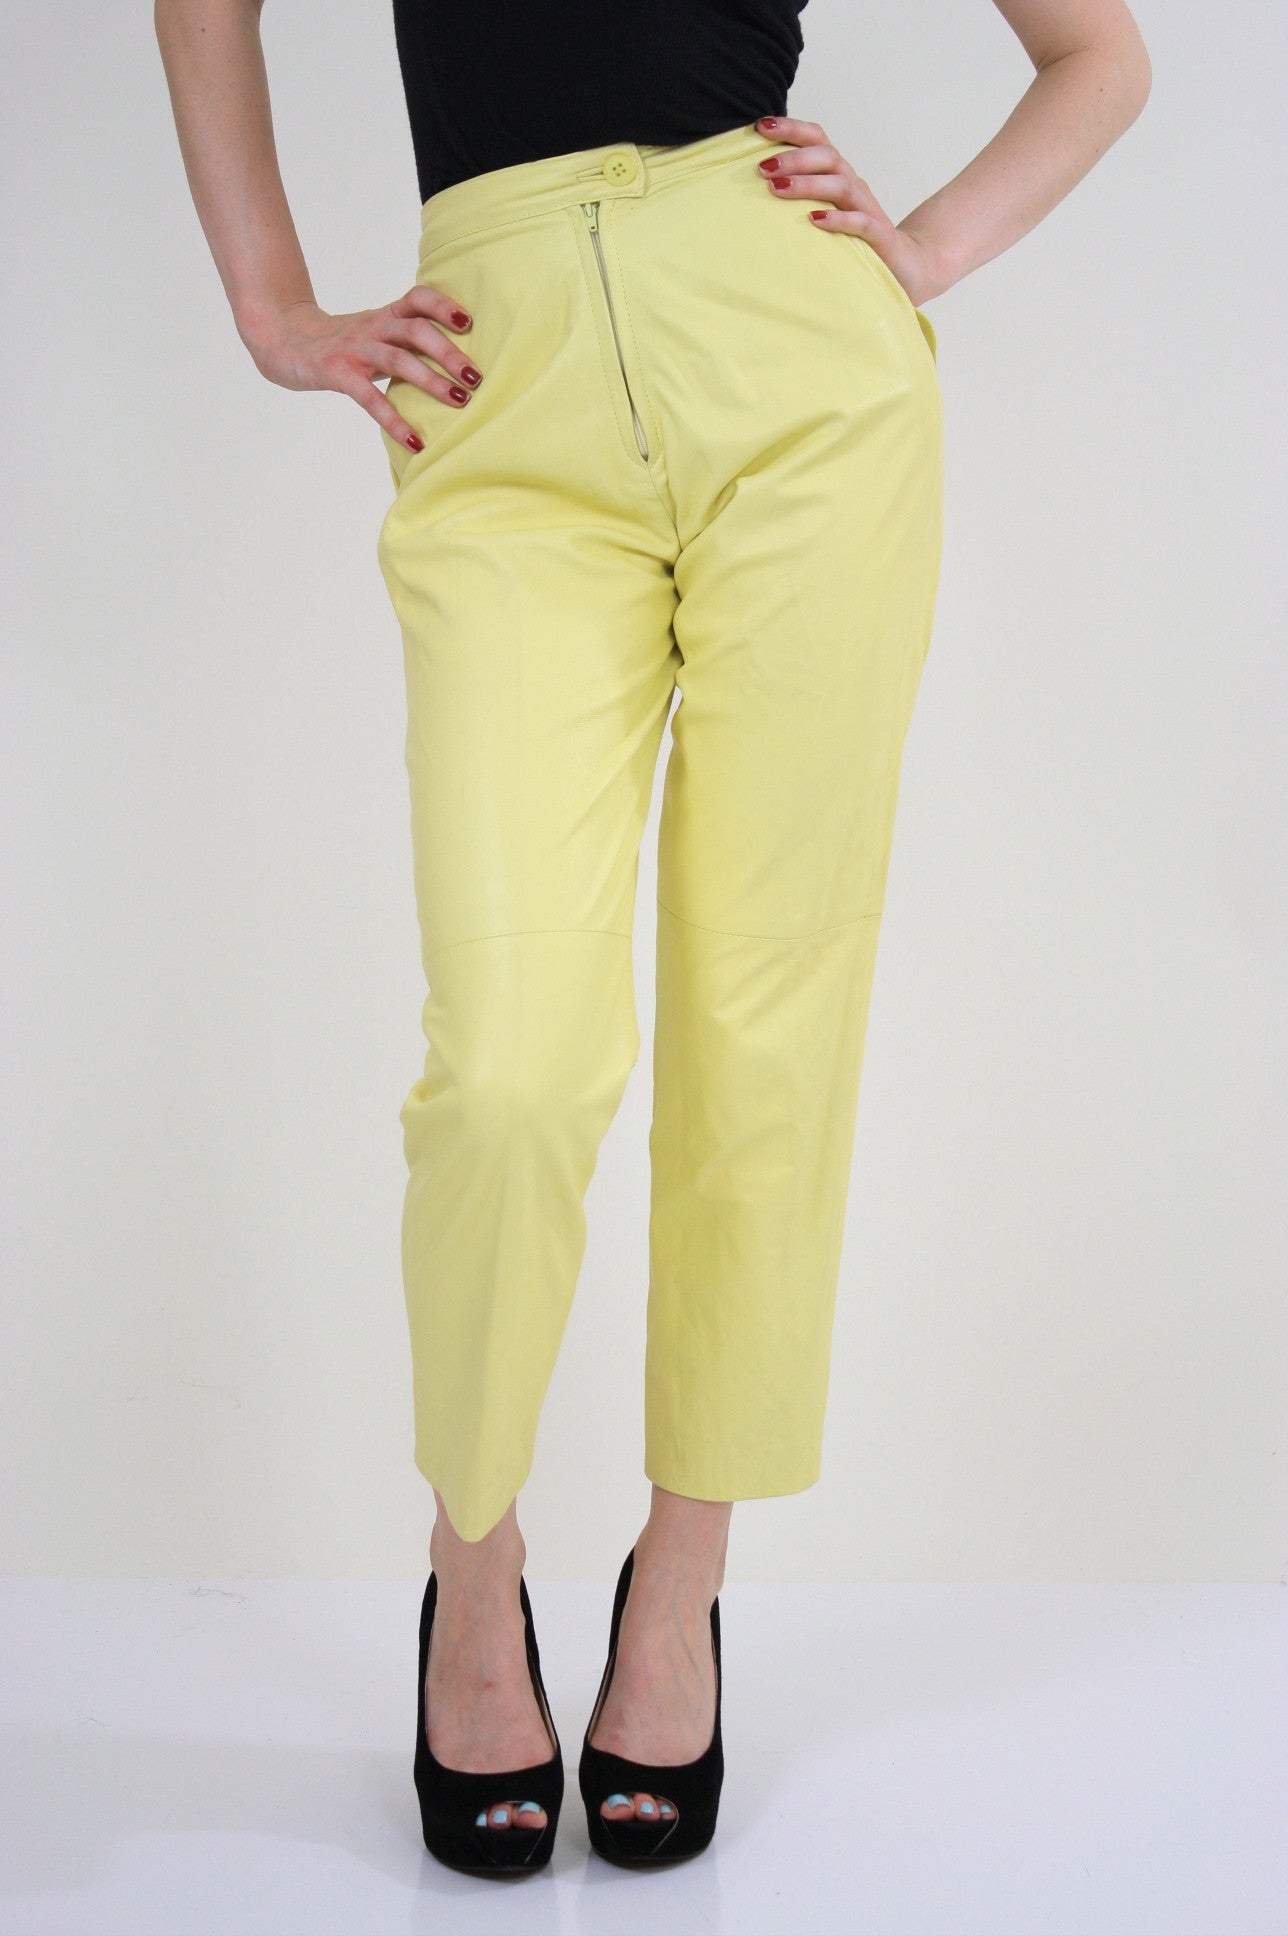 ACCOX Cotton Lycra Stretchable Slim Fit Straight Yellow Casual Cigarette  Pants Trouser for Girls/Ladies/Women(